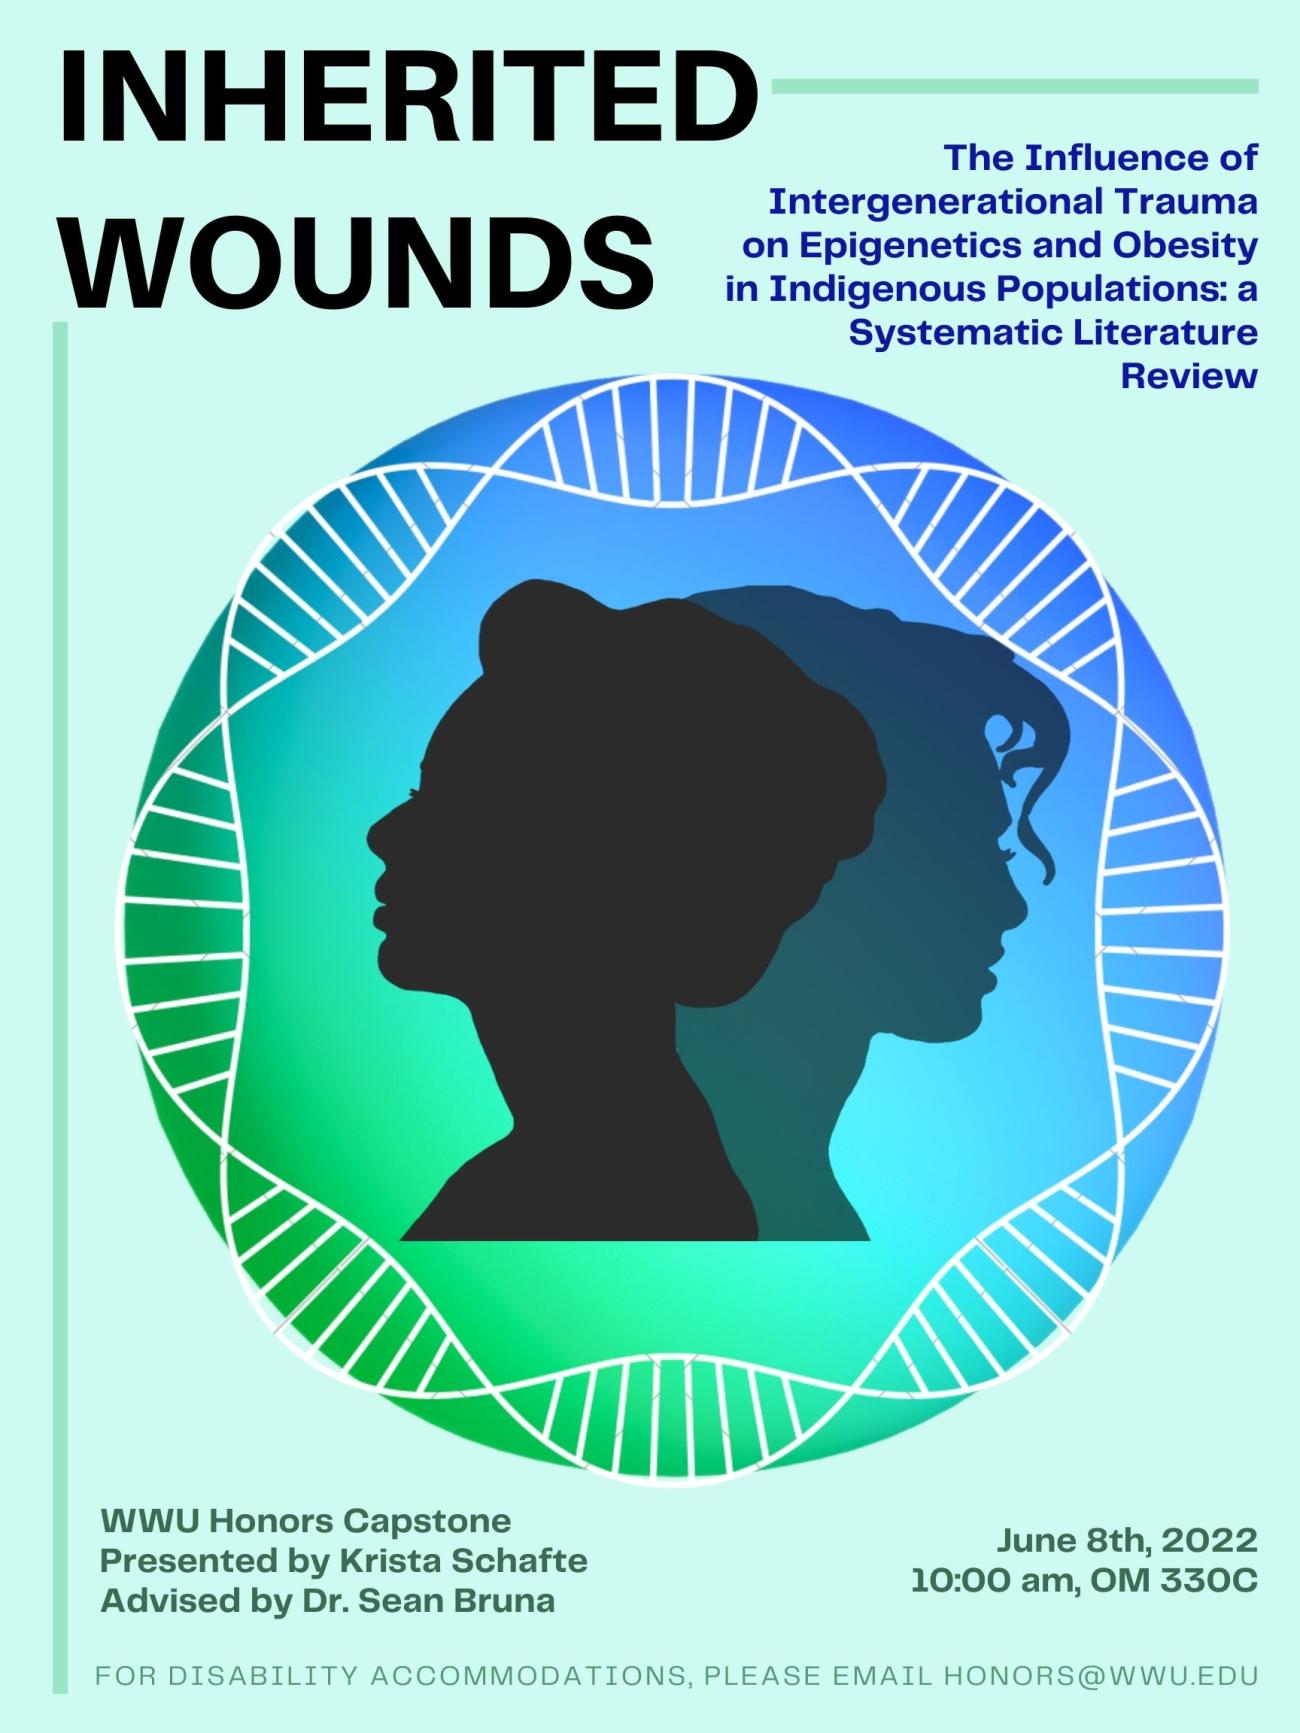 Pale green background with silhouettes of two women surrounded by a circular DNA strand. Text reads "Inherited Wounds. The Influence of Intergenerational Trauma on Epigenetics and Obesity in Indigenous Populations: a Systematic Literature Review. WWU Honors Capstone. Presented by Krista Schafte. Advised by Dr. Sean Bruna. June 8th, 2022. 10:00 am, OM 330C. For disability accommodations, please email honors@wwu.edu."